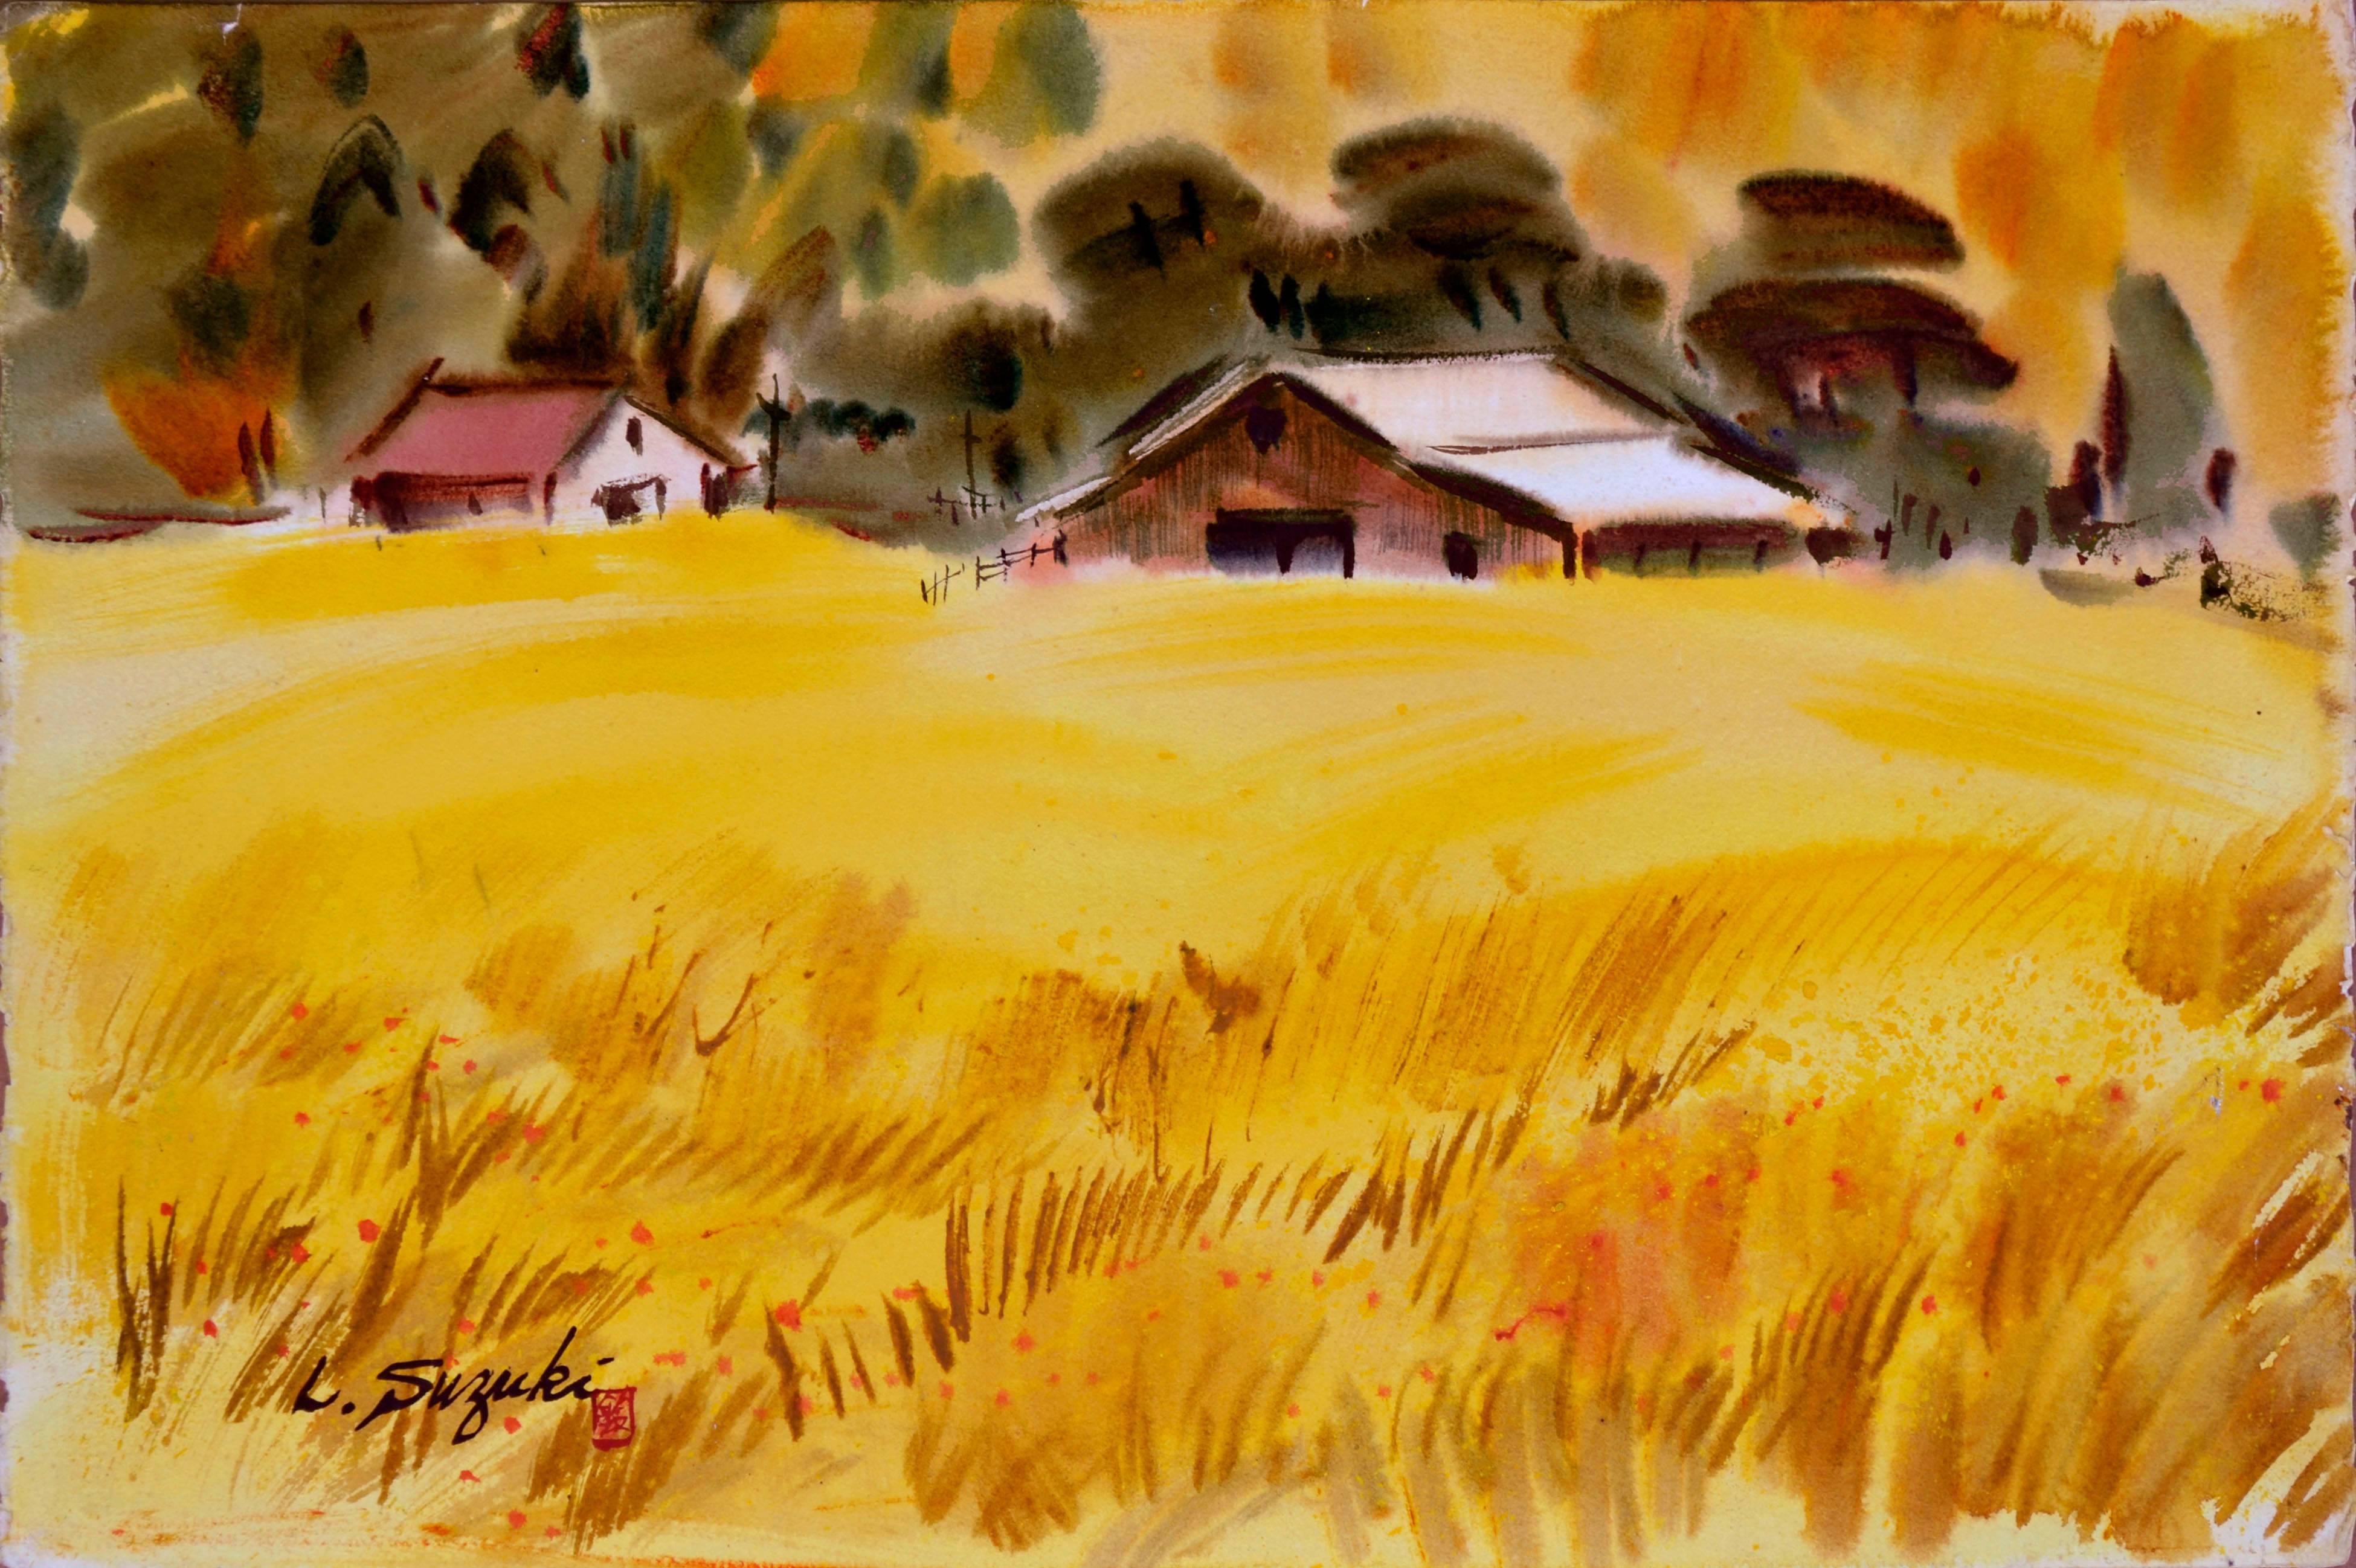 Country Barn Watercolor Landscape  - Painting by Lewis Suzuki